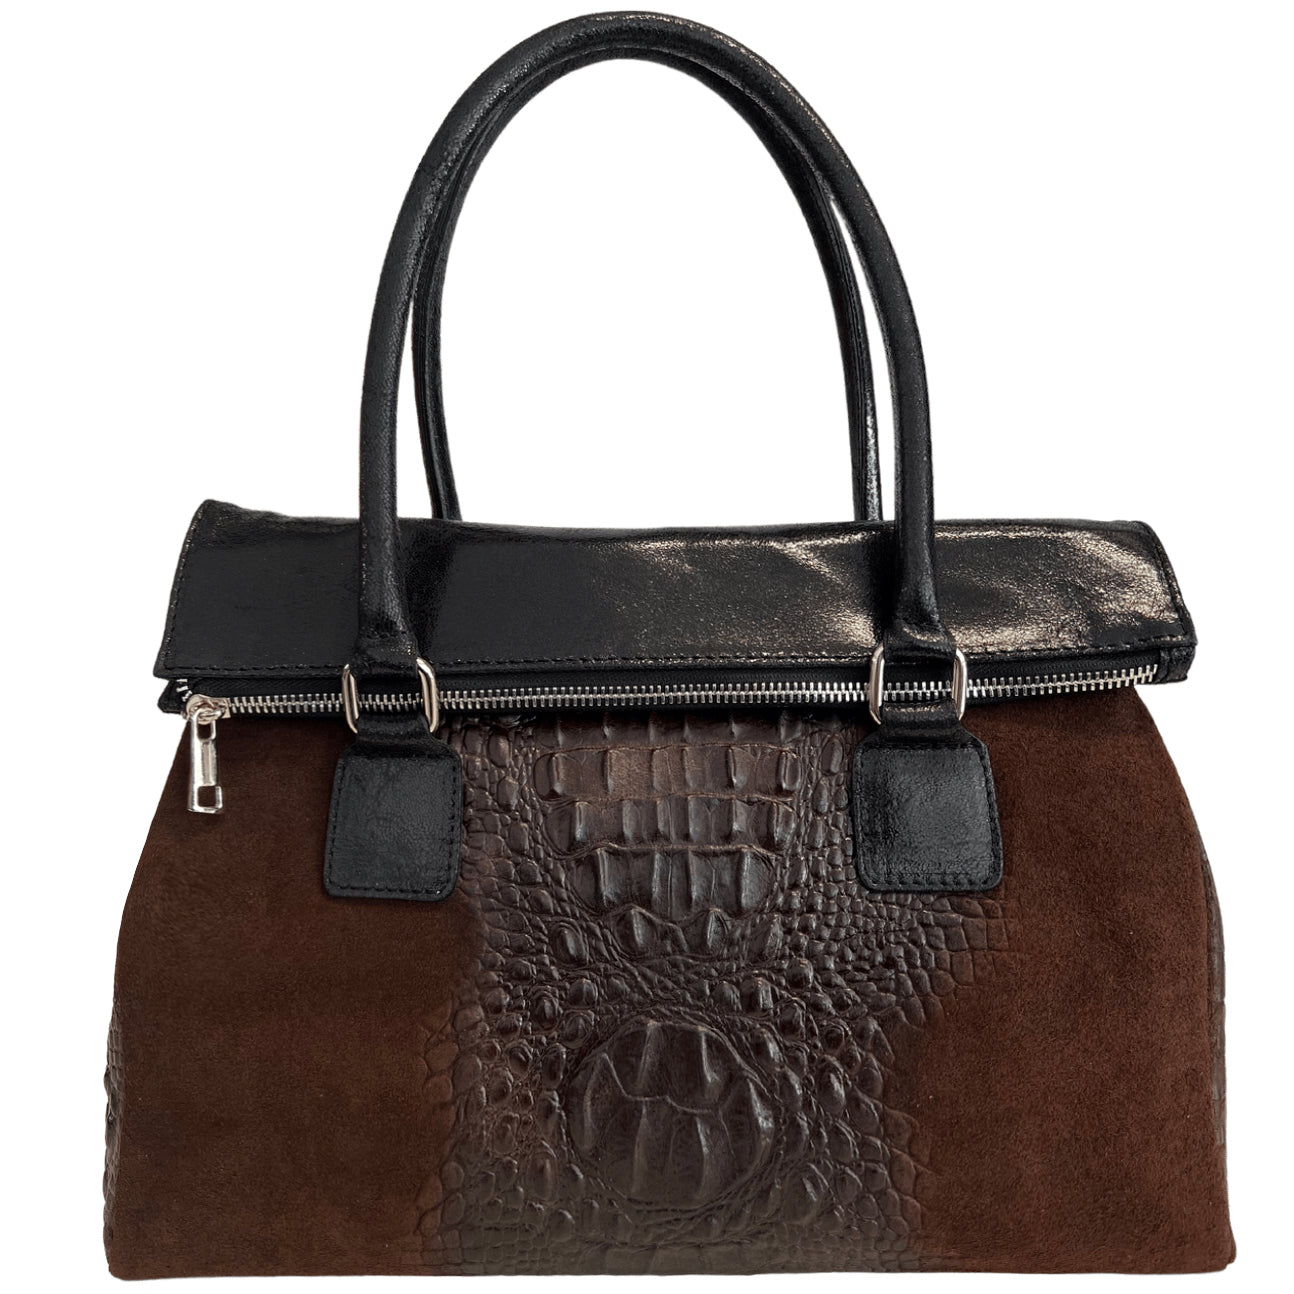 Modarno Woman bag in genuine suede leather with handle with removable shoulder strap 38x14x25 cm